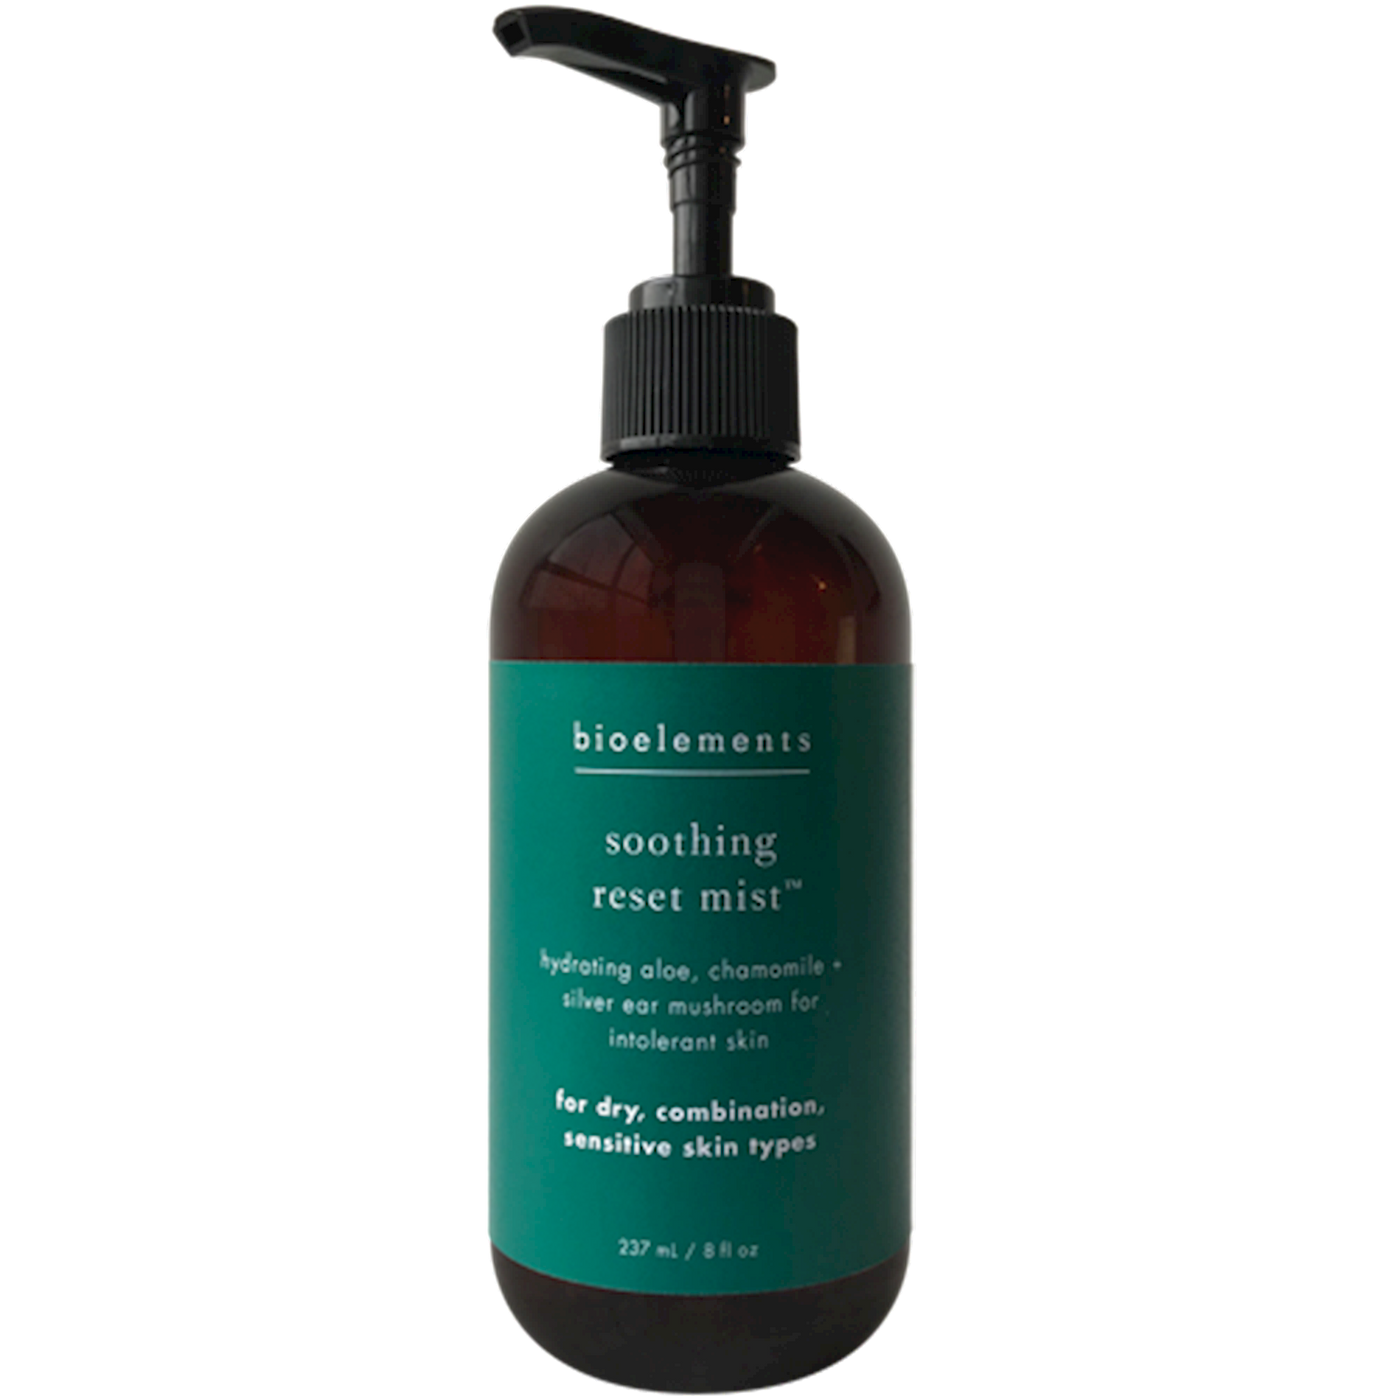 Soothing Reset Mist 8 fl oz Curated Wellness